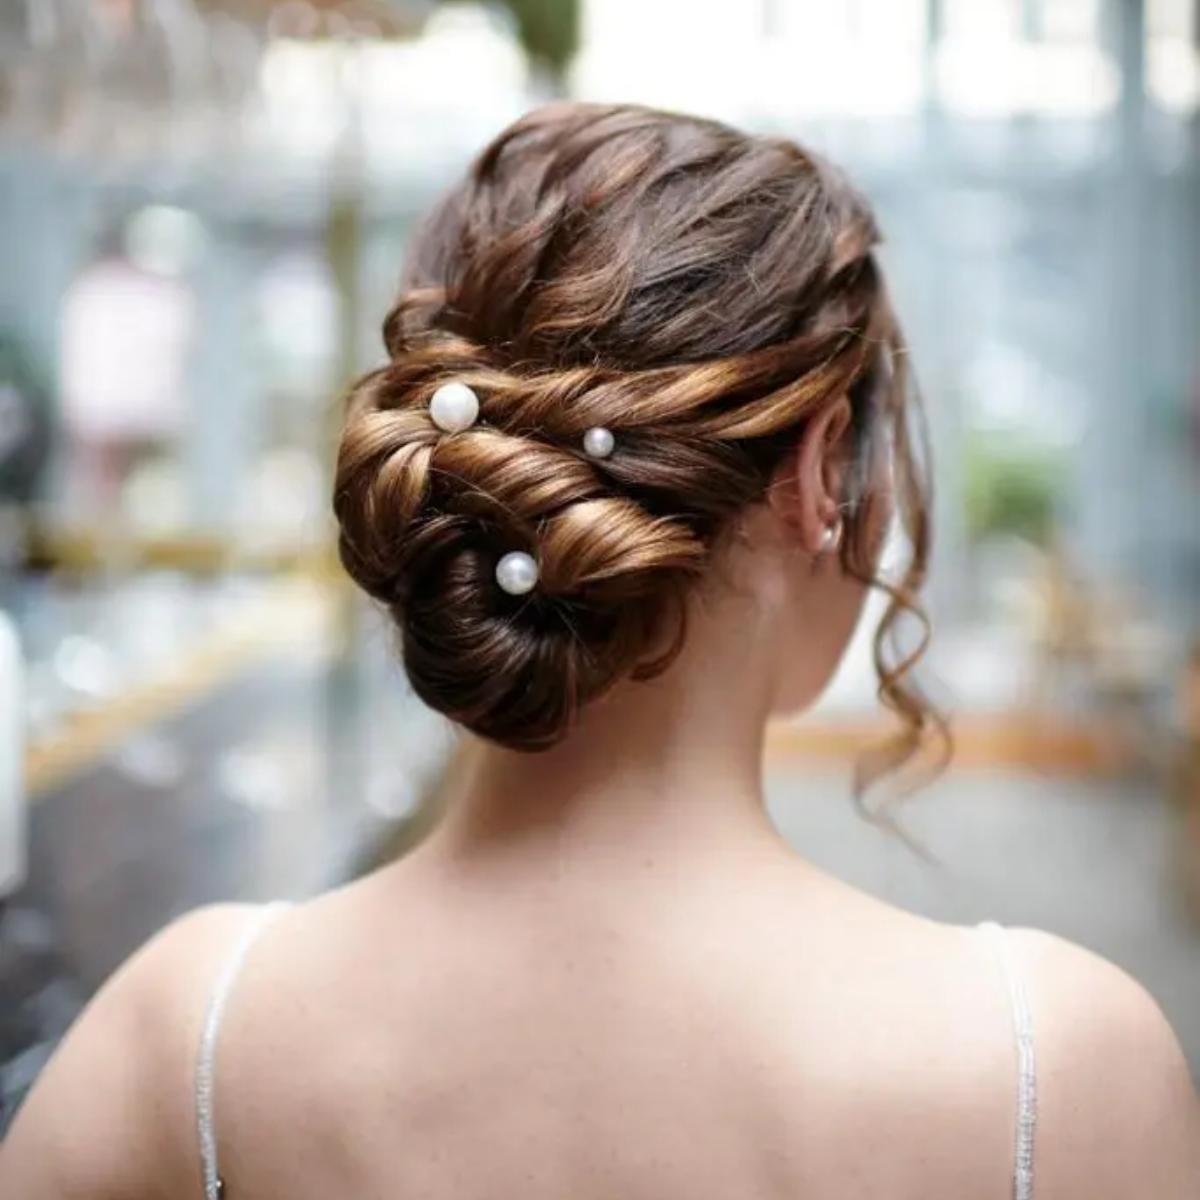 Modern Wedding Hairstyles for the Cool, Contemporary Bride